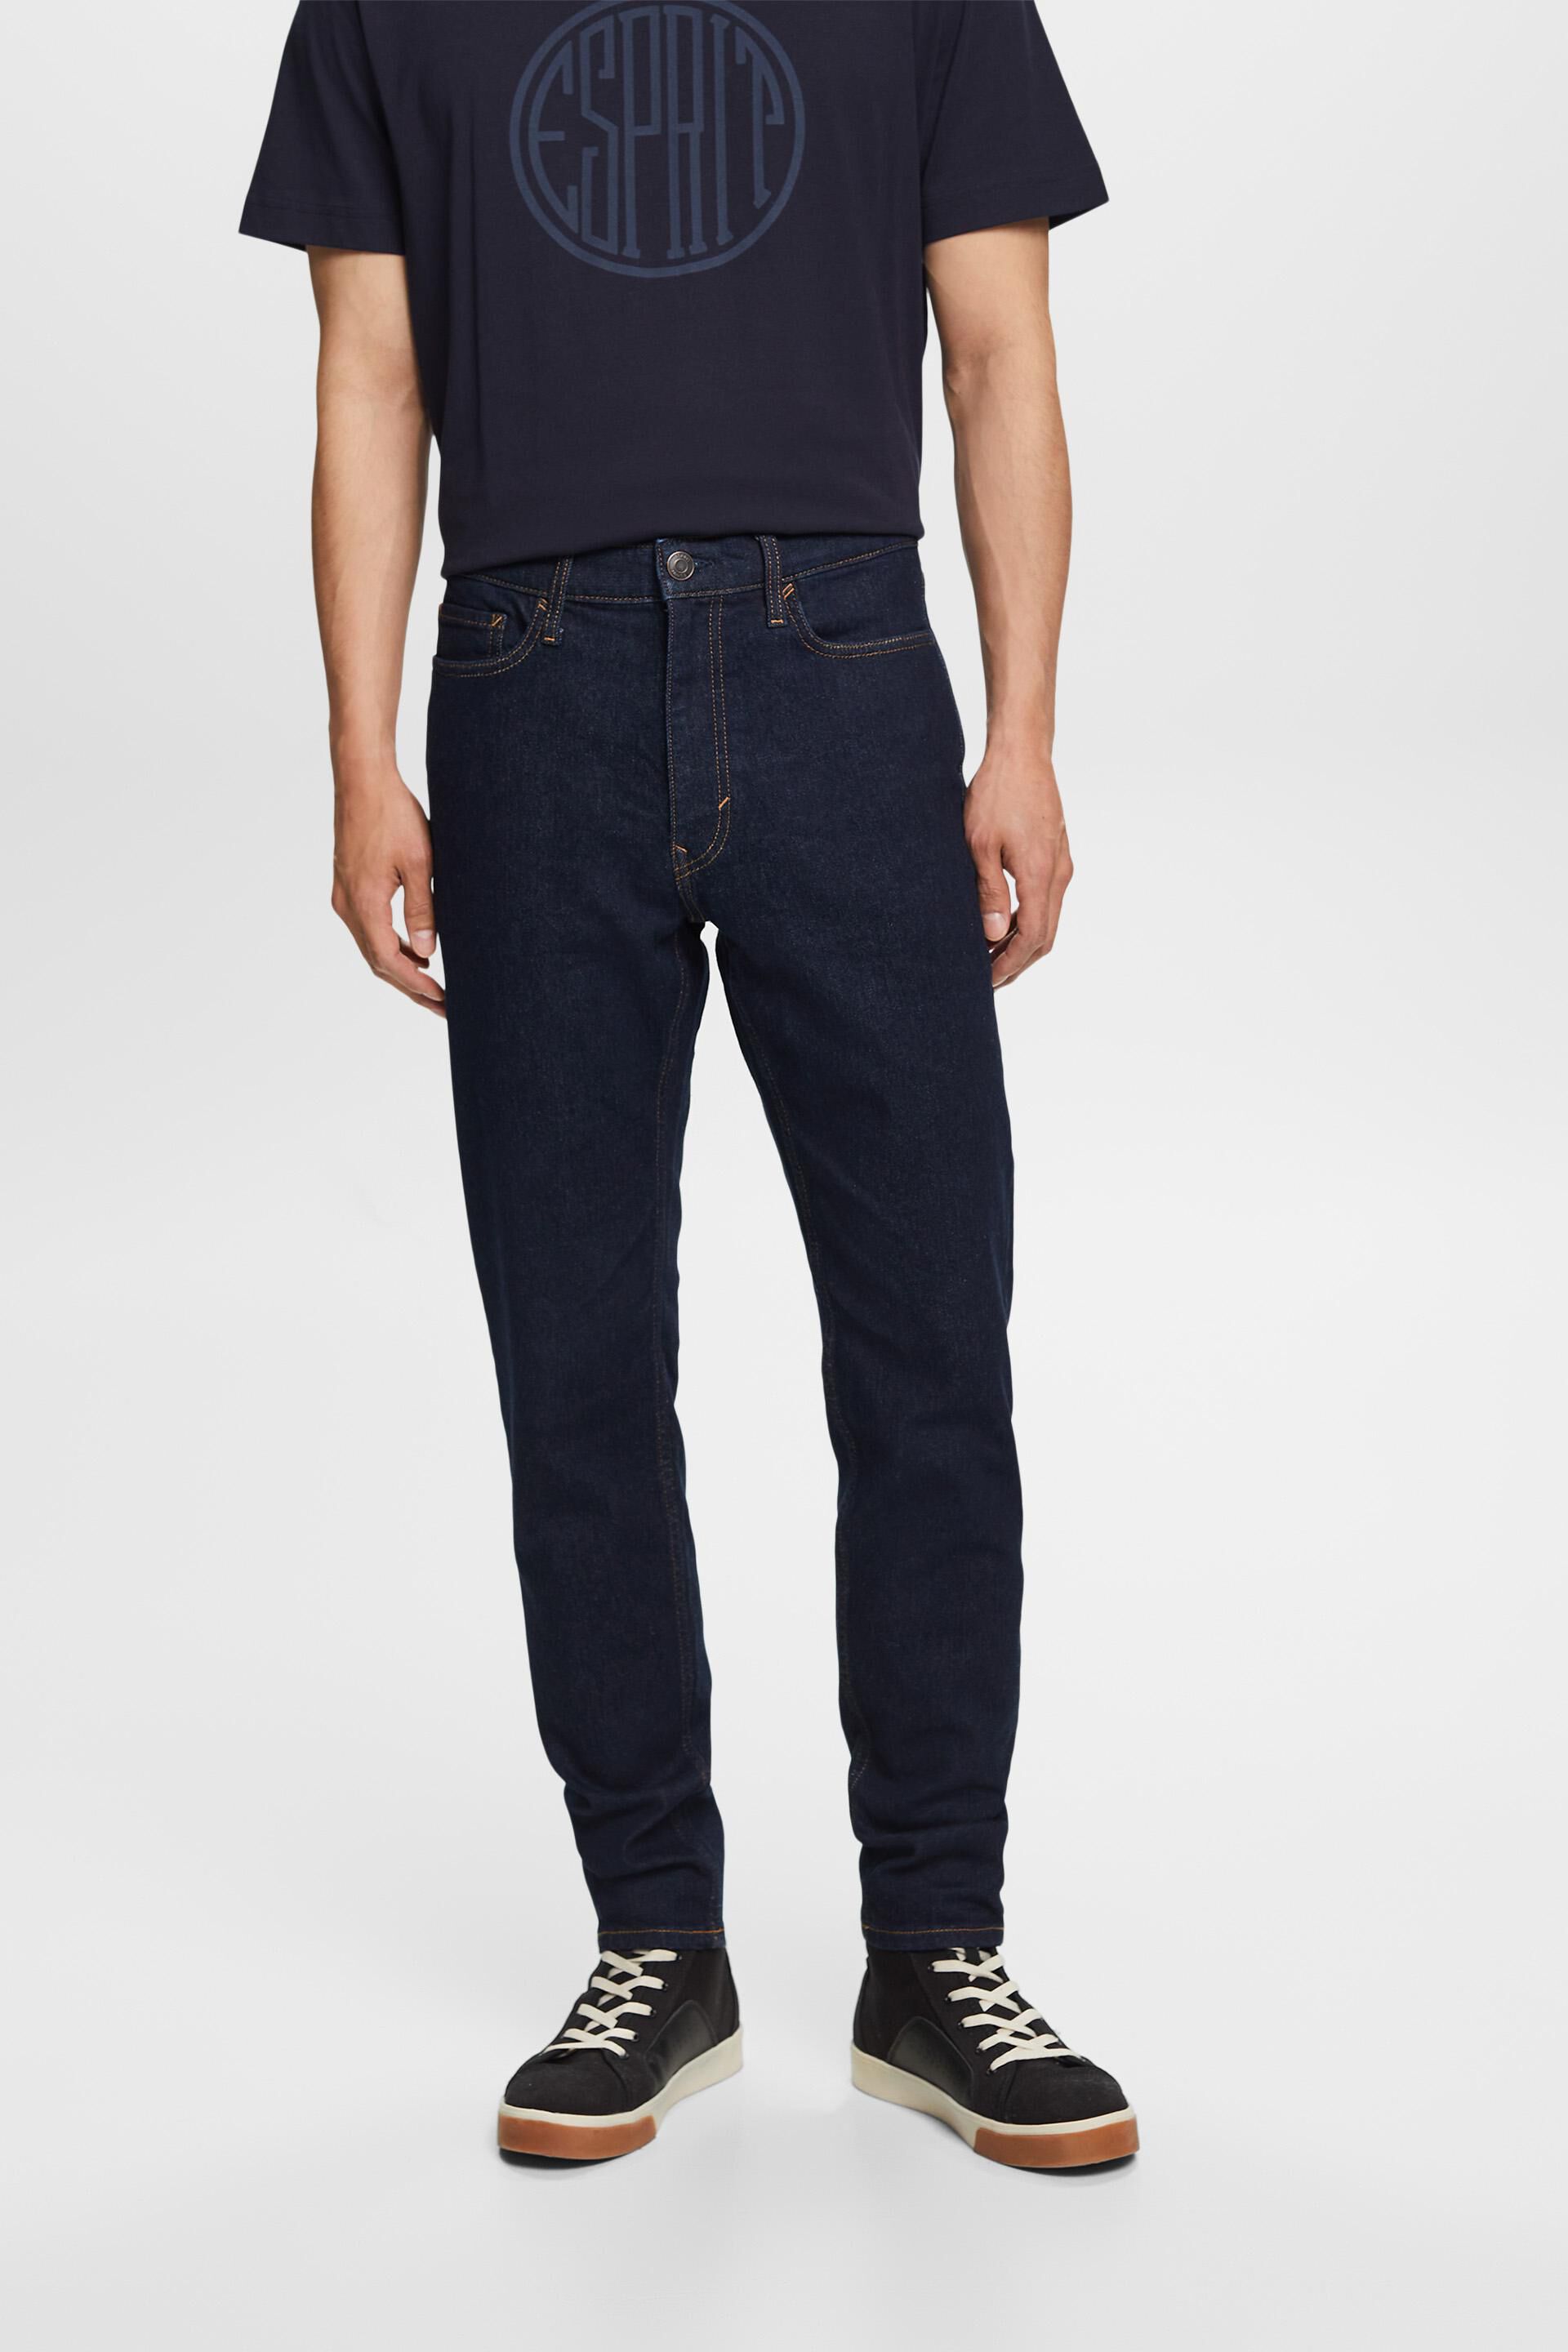 Esprit jeans Tapered fit